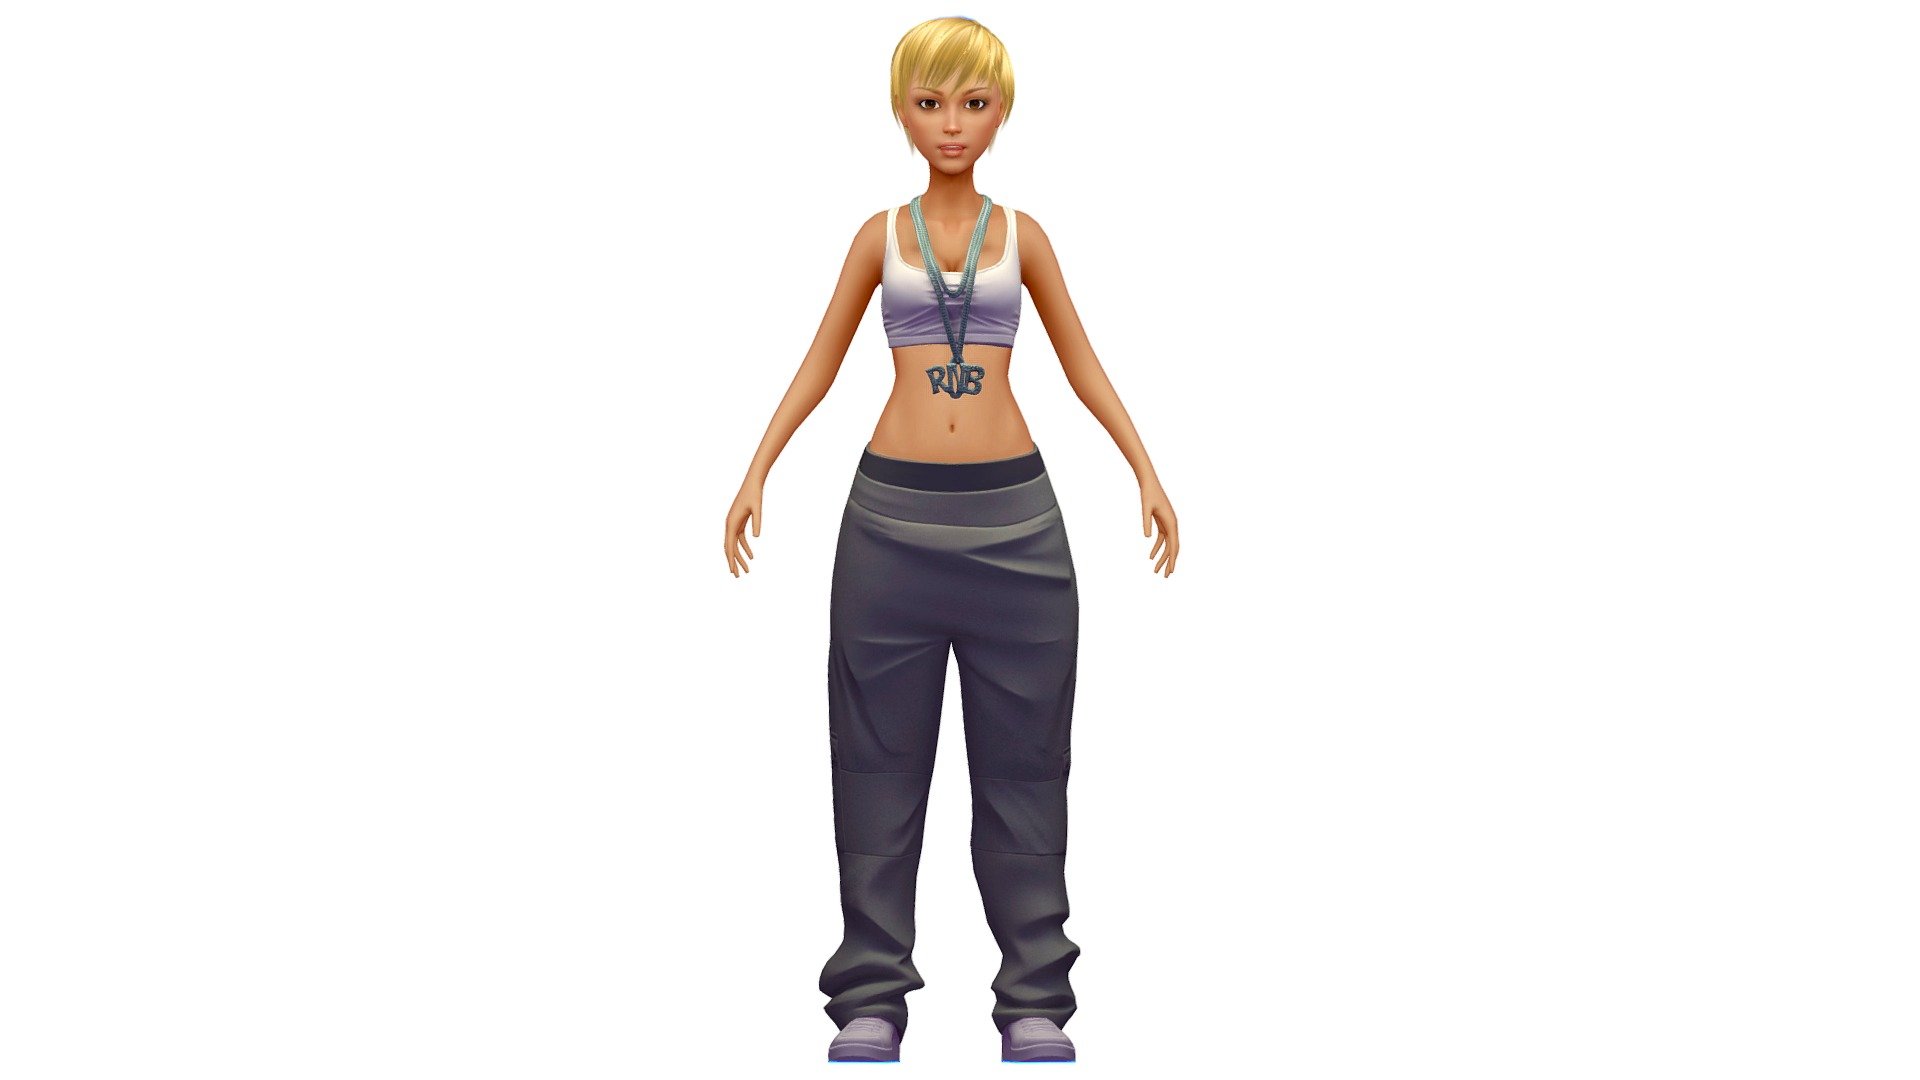 you can combine and match other combinations using the collection:

hair collection - https://skfb.ly/ovqTn

clotch collection - https://skfb.ly/ovqT7

lowpoly avatar collection - https://skfb.ly/ovqTu - Cartoon Style Low Poly HipHop Girl Avatar - Buy Royalty Free 3D model by Oleg Shuldiakov (@olegshuldiakov) 3d model